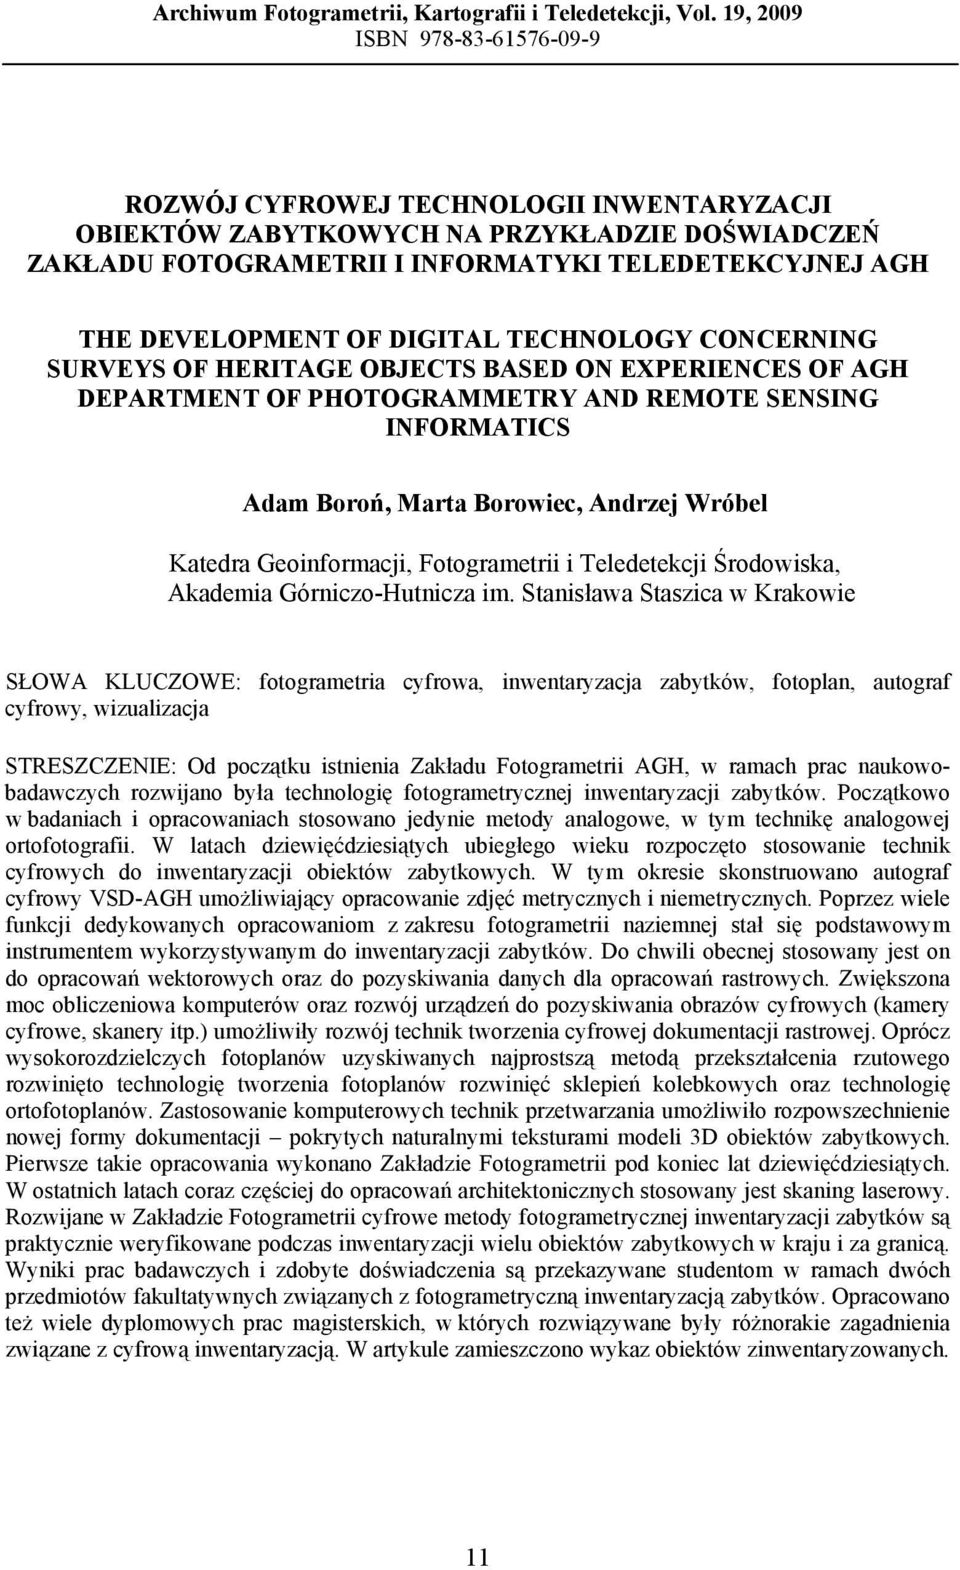 DIGITAL TECHNOLOGY CONCERNING SURVEYS OF HERITAGE OBJECTS BASED ON EXPERIENCES OF AGH DEPARTMENT OF PHOTOGRAMMETRY AND REMOTE SENSING INFORMATICS Adam, Marta Borowiec, Andrzej Wróbel Katedra